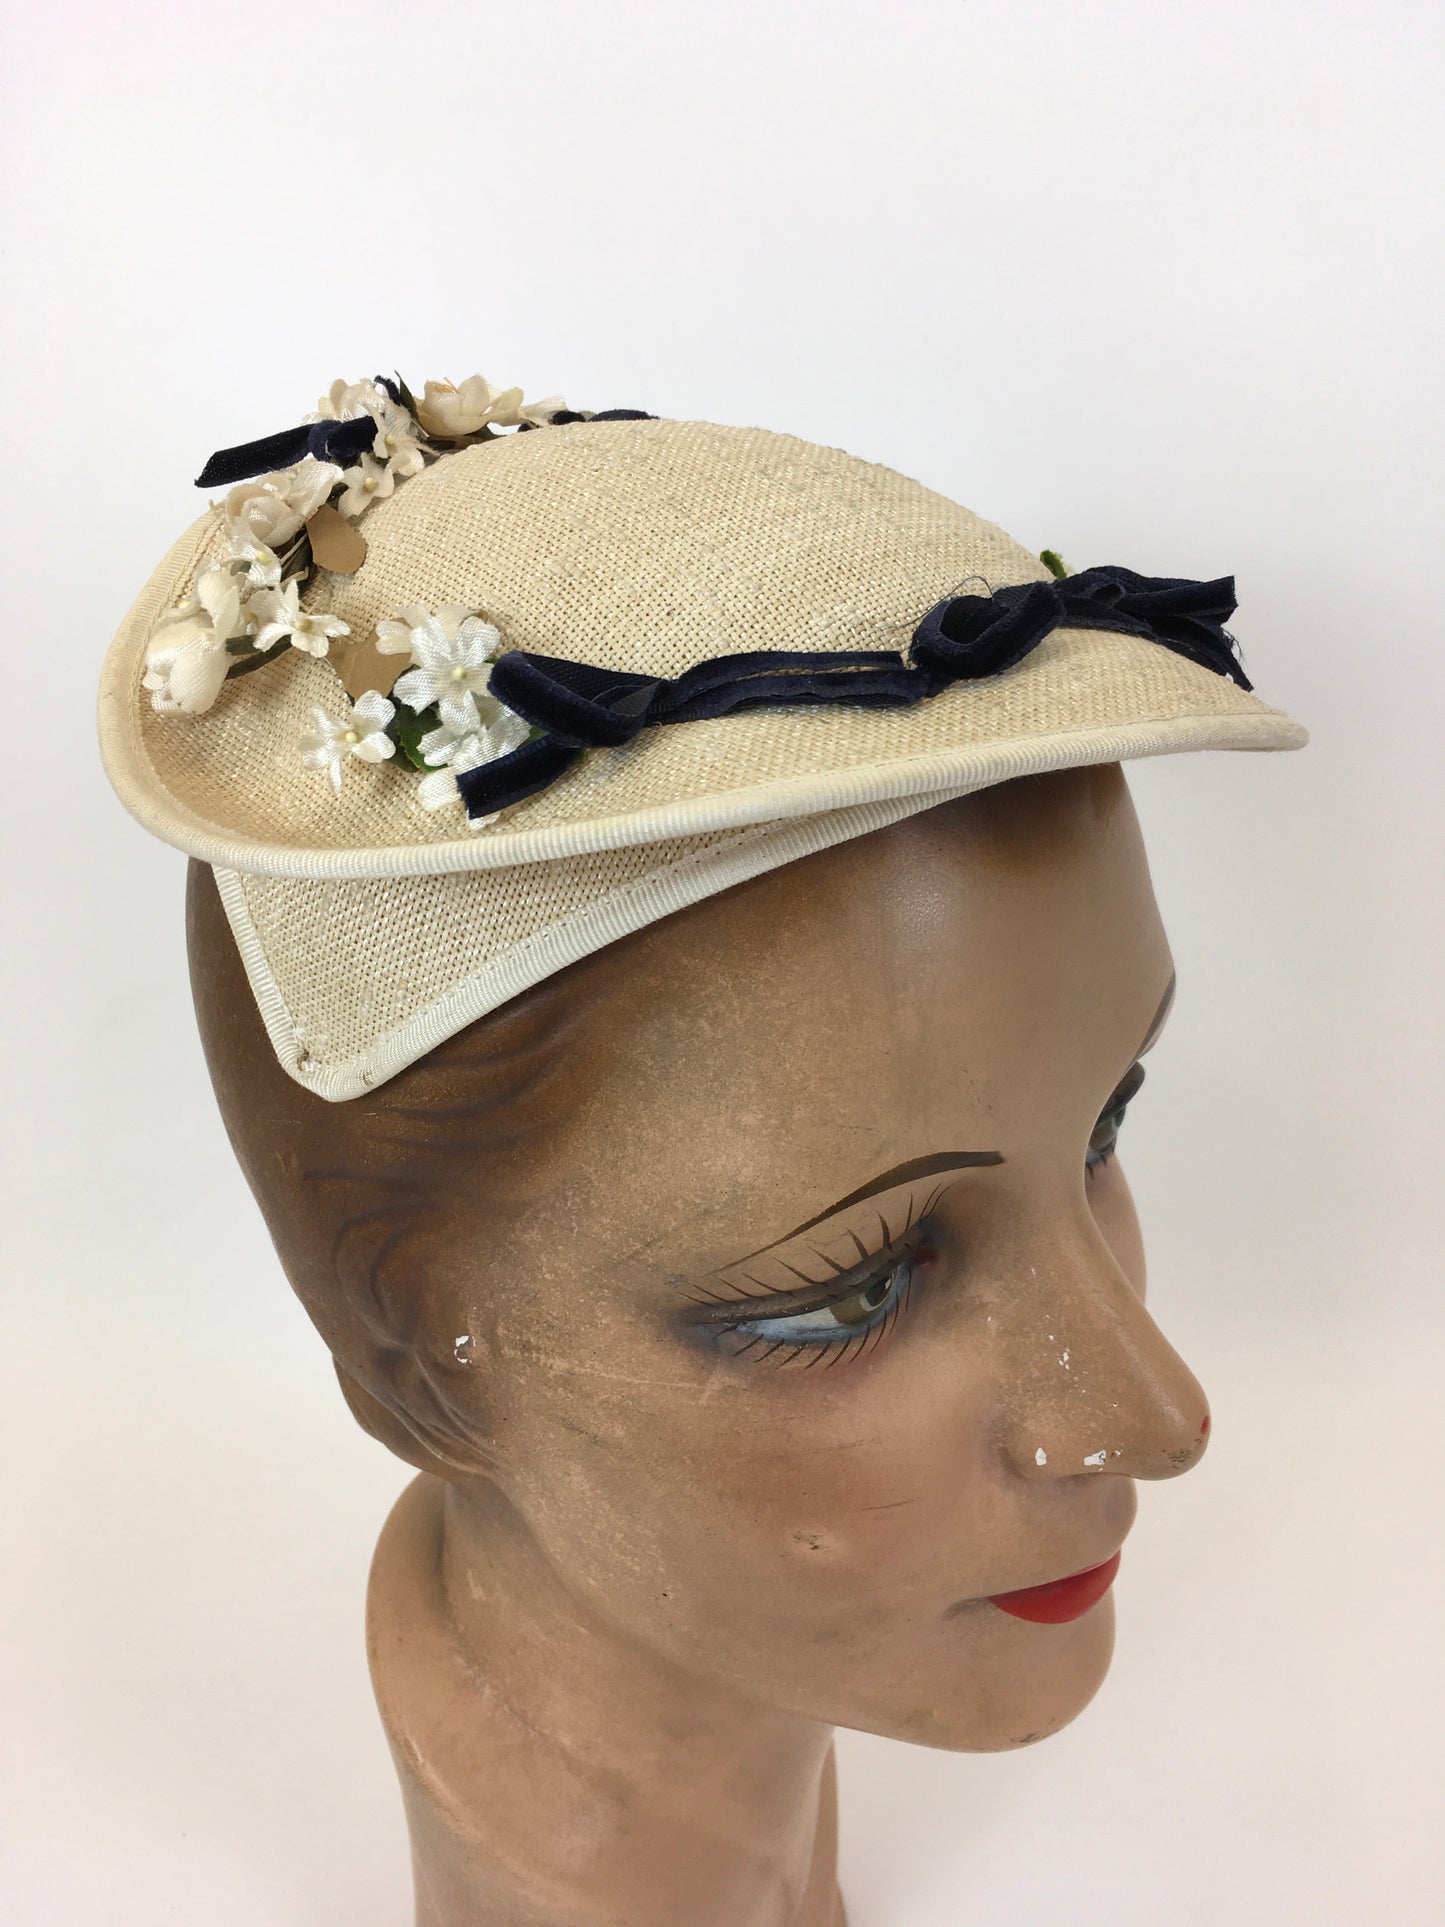 Original 1950’s Darling Natural Straw Headpiece - With Millinery Flora and Navy Velvet Bows